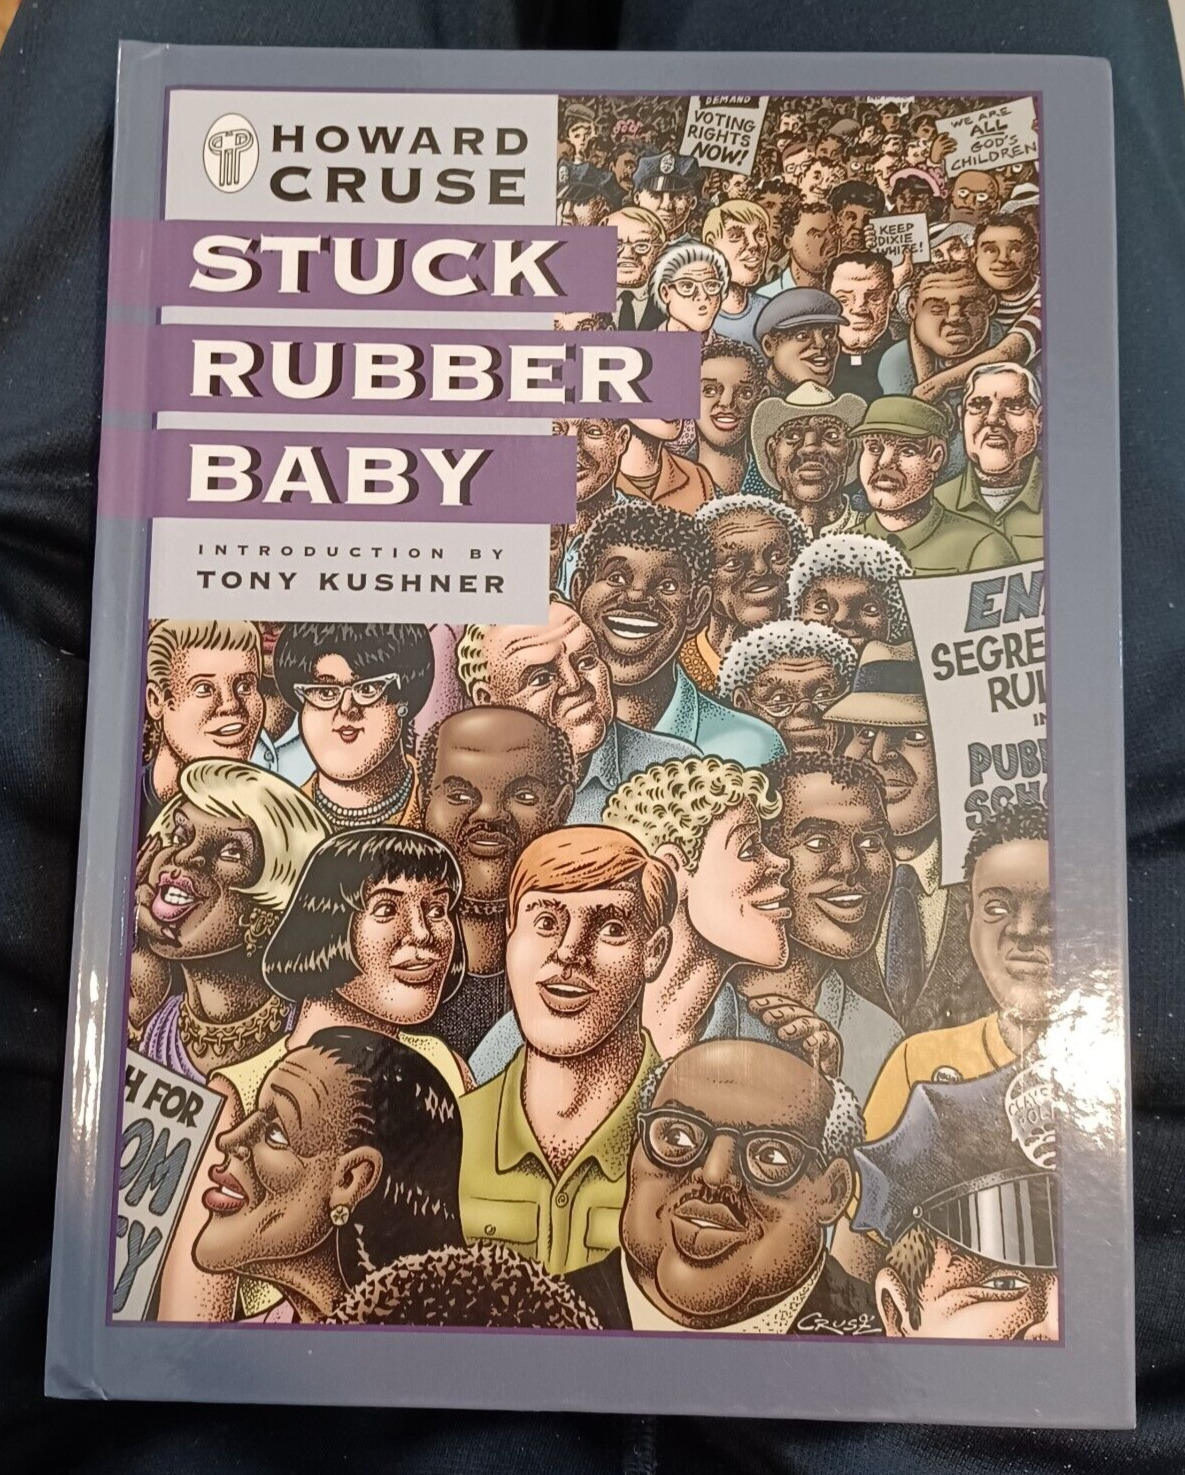 Stuck Rubber Baby HC Image Howard Cruse 1st Edition, 1st Print 1995  NEW  SH-1